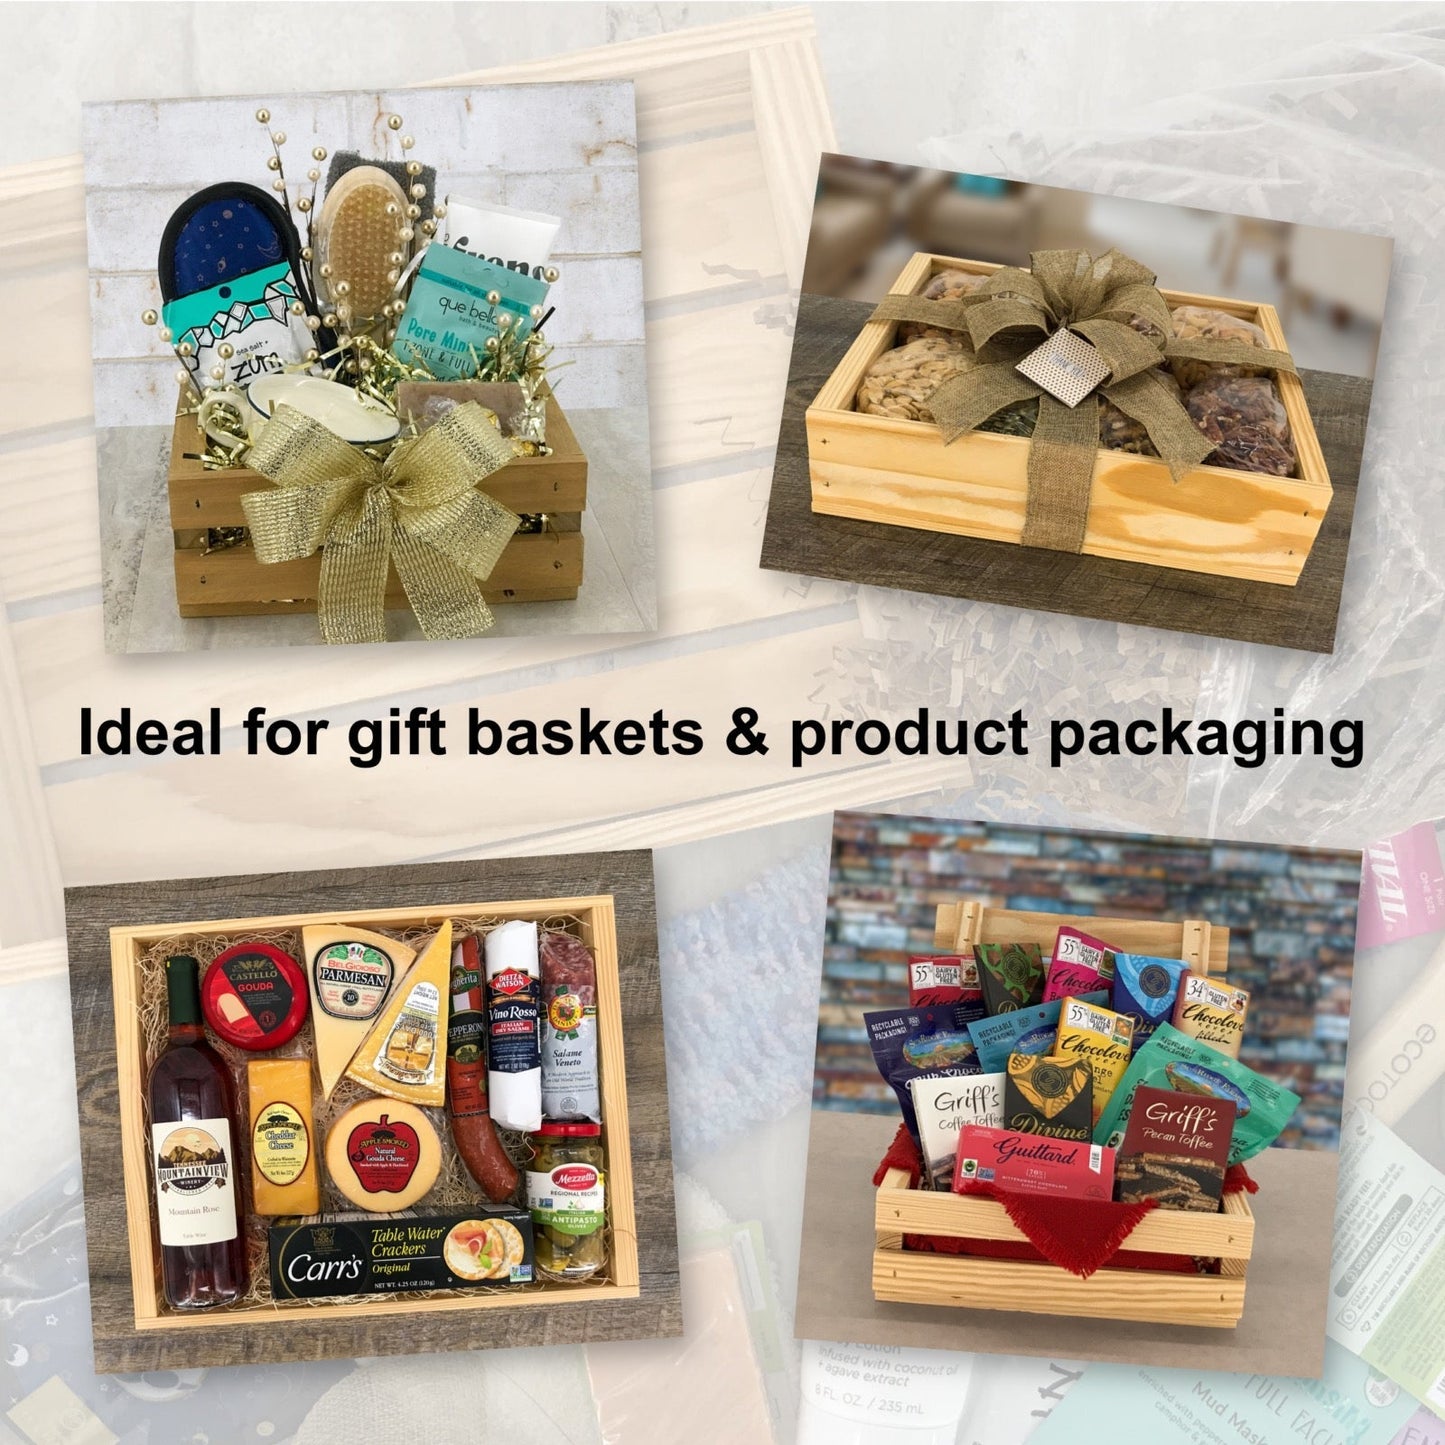 Ideal for gift baskets and product packaging, WB-13-3.5-3.5-ST-NW-NL, 6-WB-13-3.5-3.5-ST-NW-NL, 12-WB-13-3.5-3.5-ST-NW-NL, 24-WB-13-3.5-3.5-ST-NW-NL, 48-WB-13-3.5-3.5-ST-NW-NL, 96-WB-13-3.5-3.5-ST-NW-NL